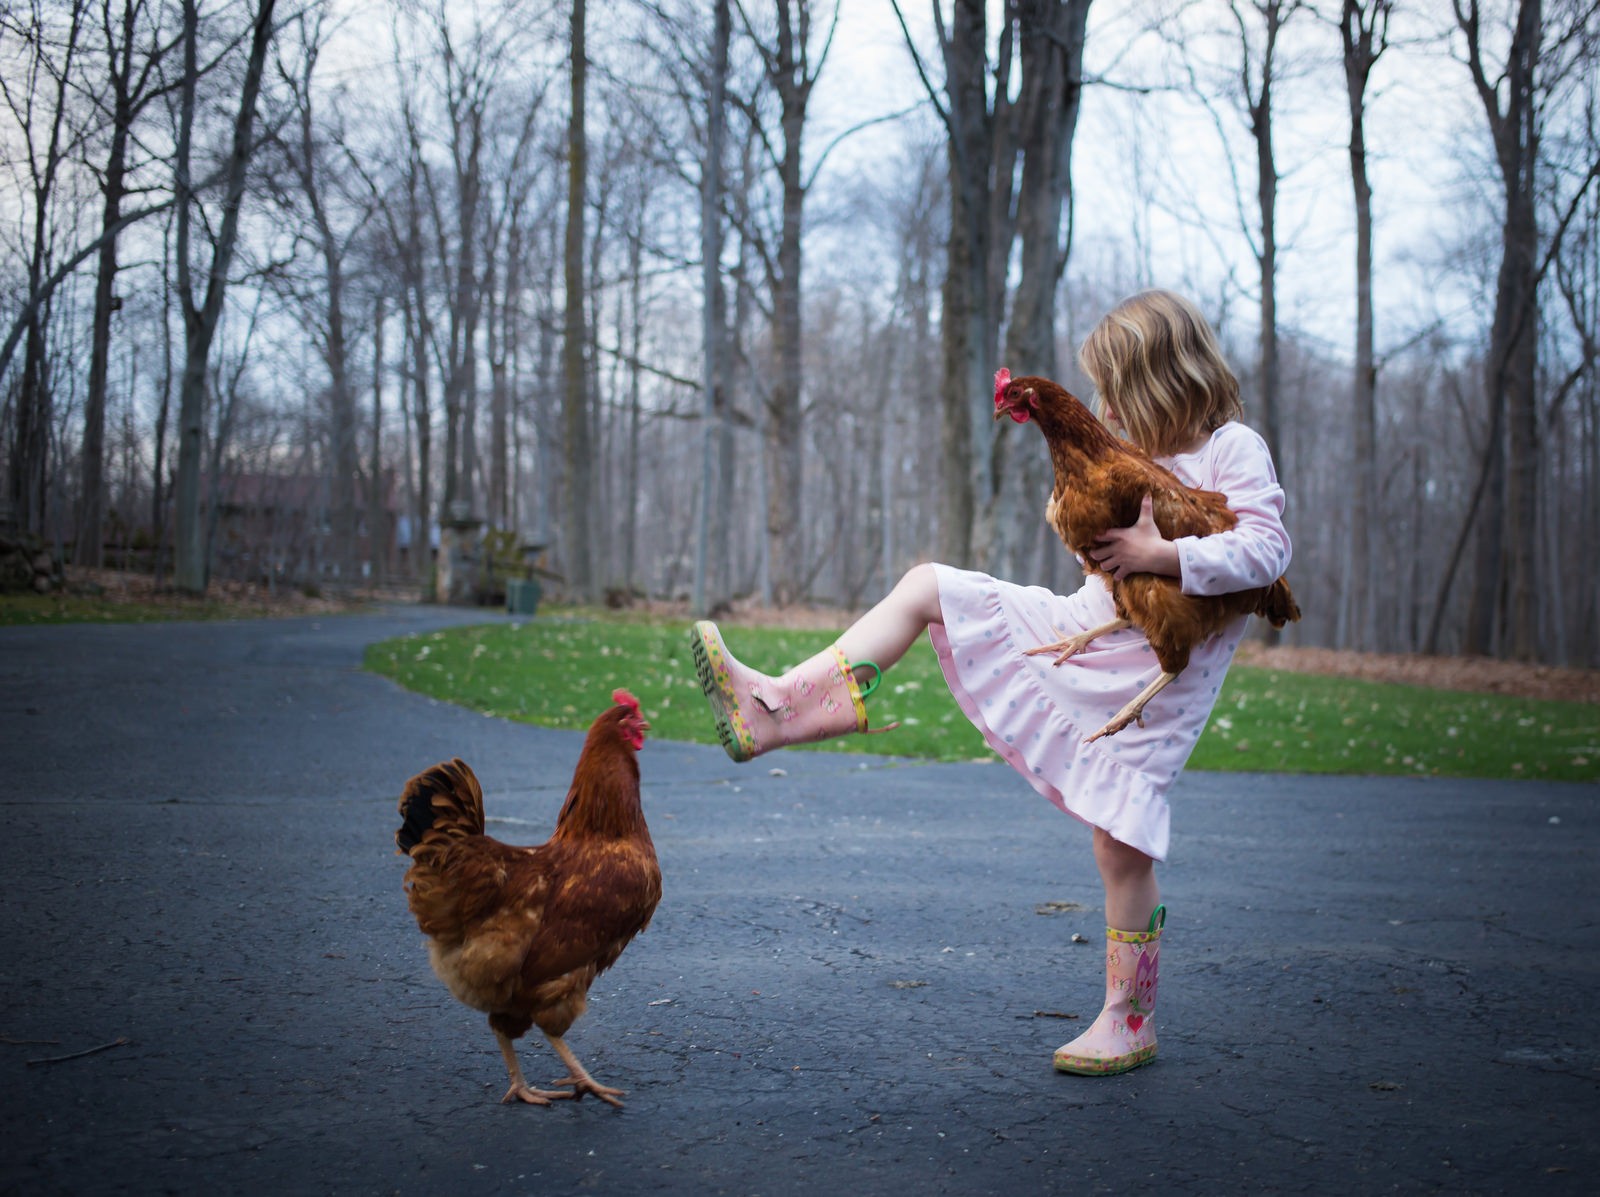 People 1600x1197 roosters forest road children